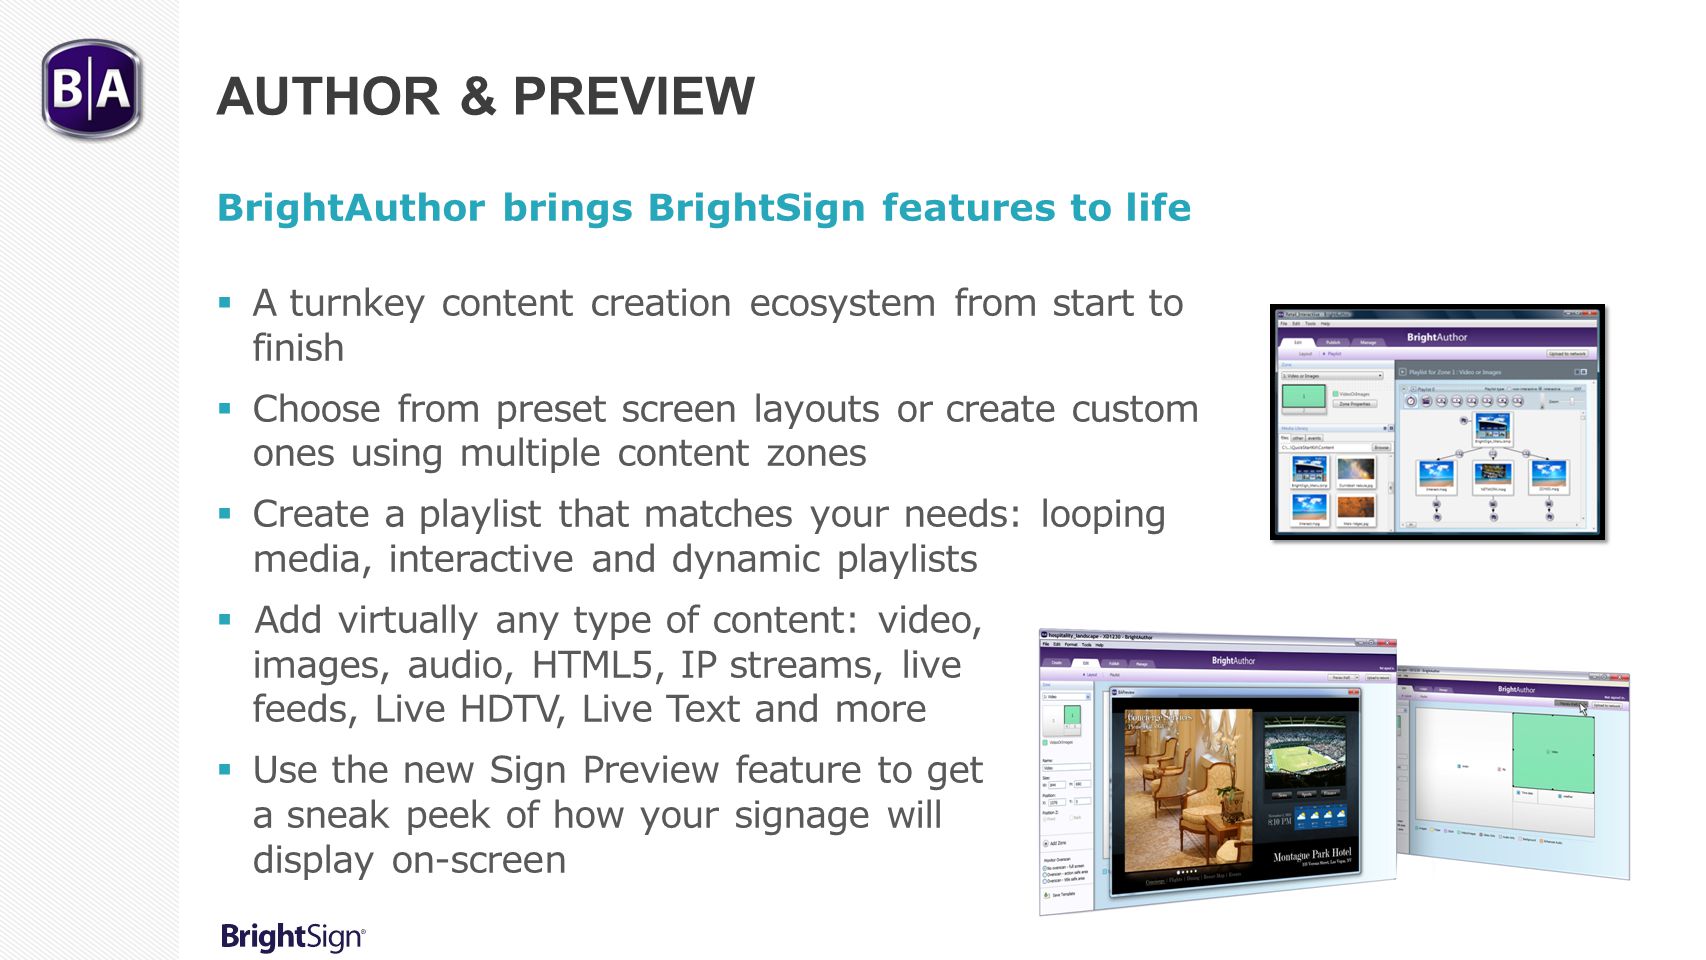 Author & Preview BrightAuthor brings BrightSign features to life